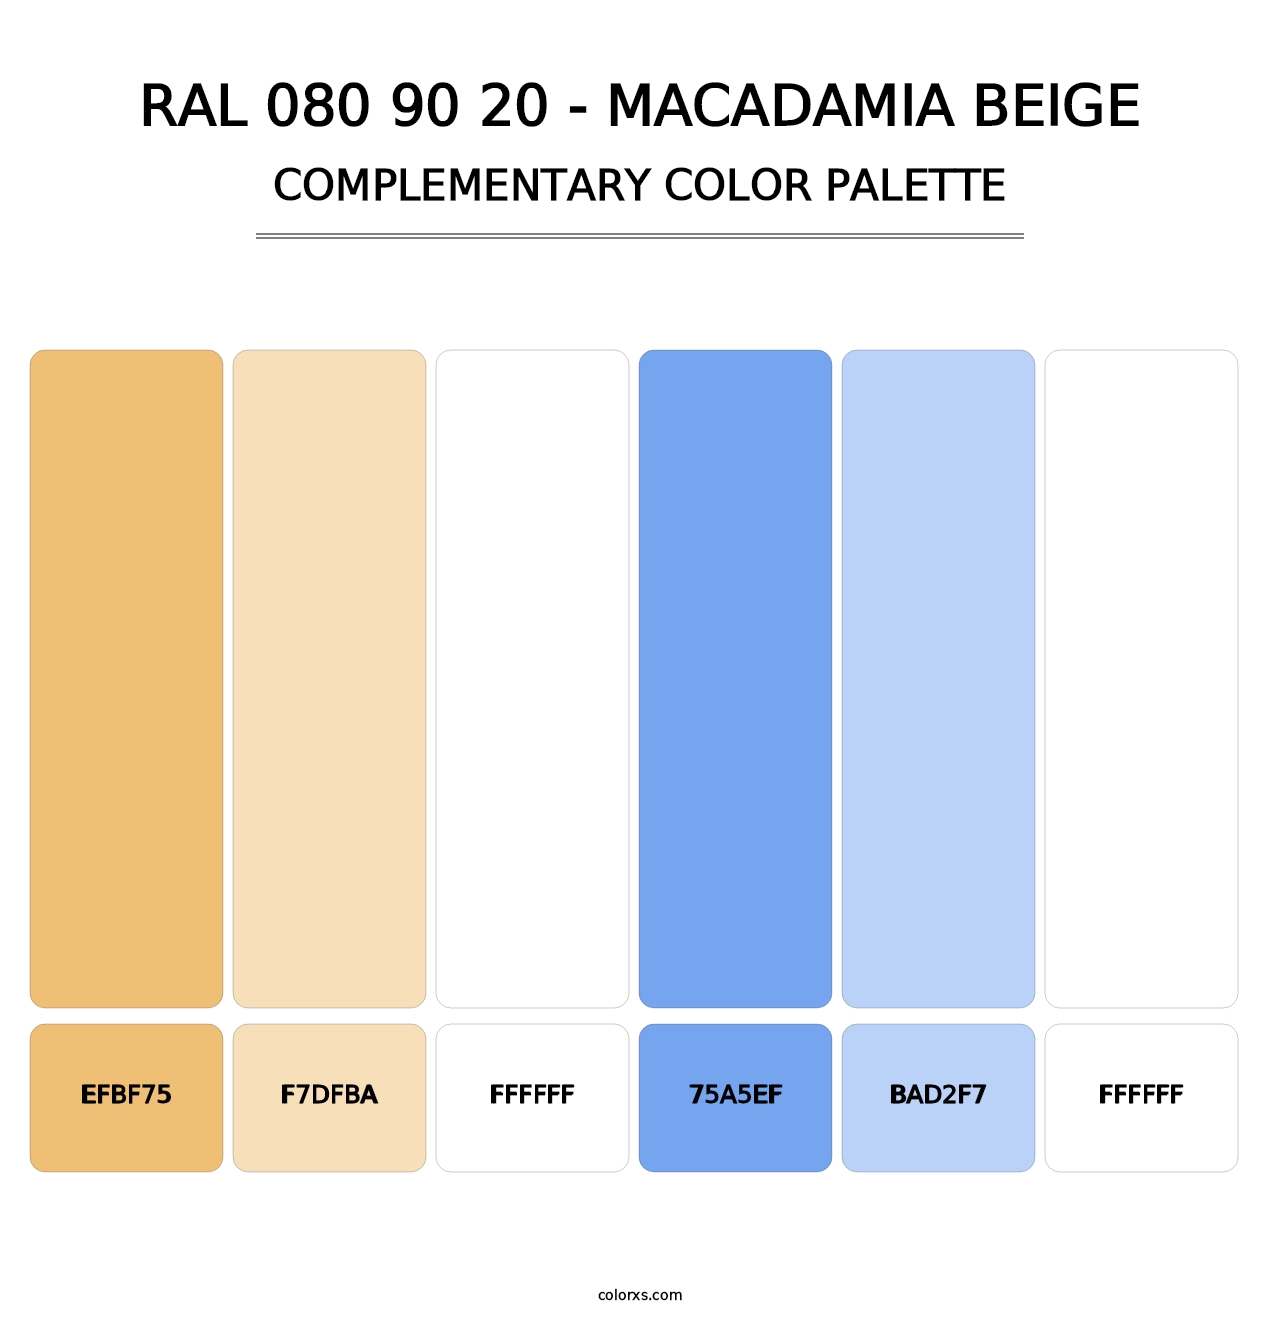 RAL 080 90 20 - Macadamia Beige - Complementary Color Palette